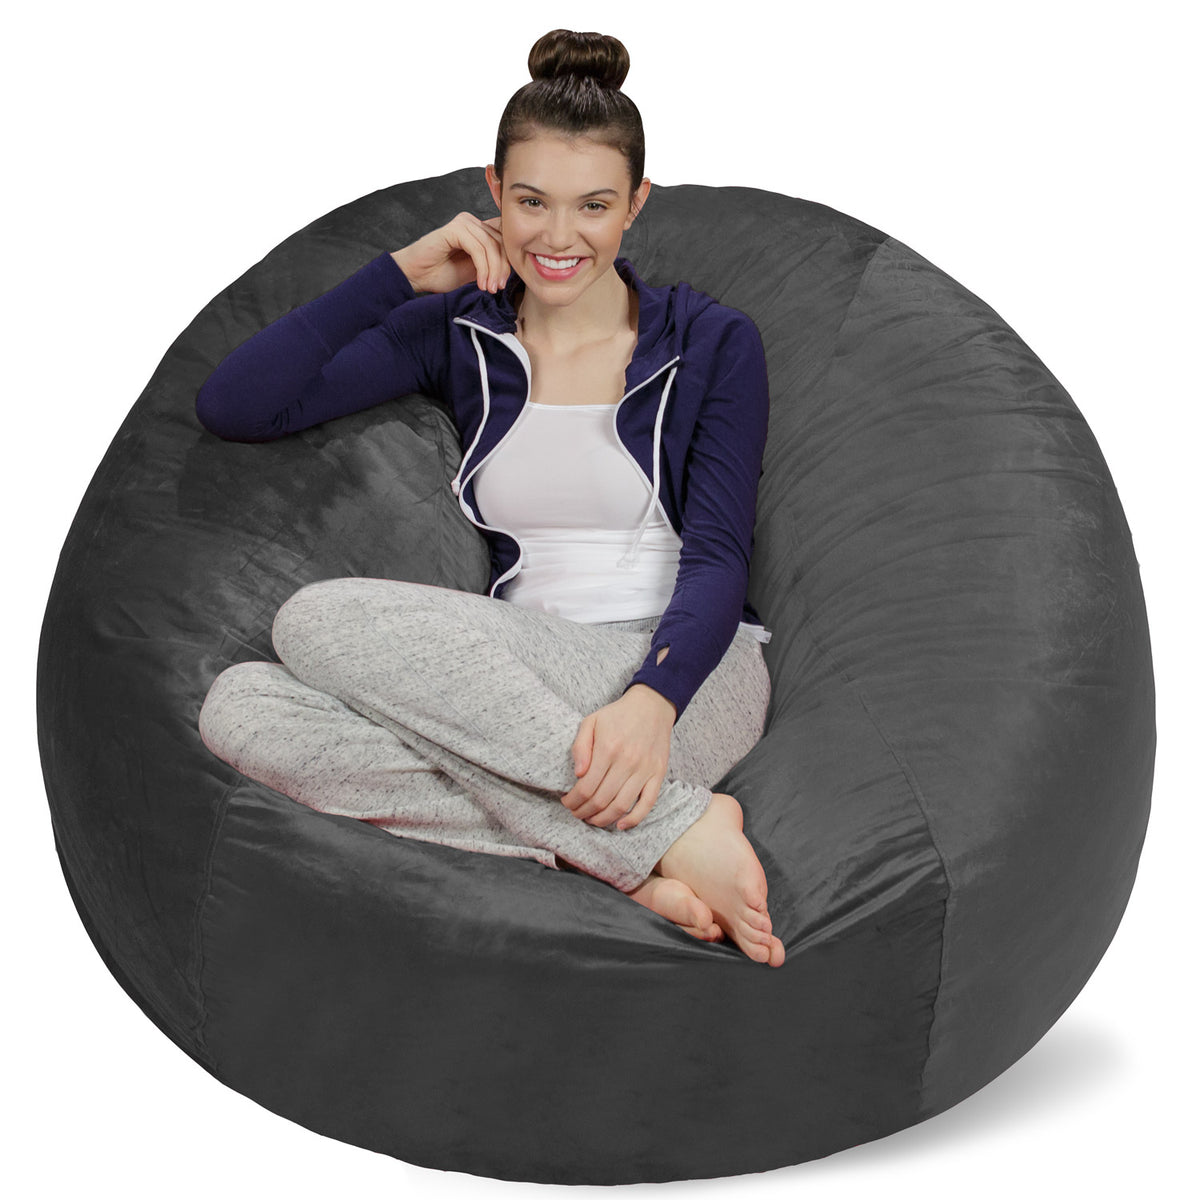 3Ft Bean Bag Chairs for Adults with Filling, Medium Bean Bag Sofa with  Memory Fo